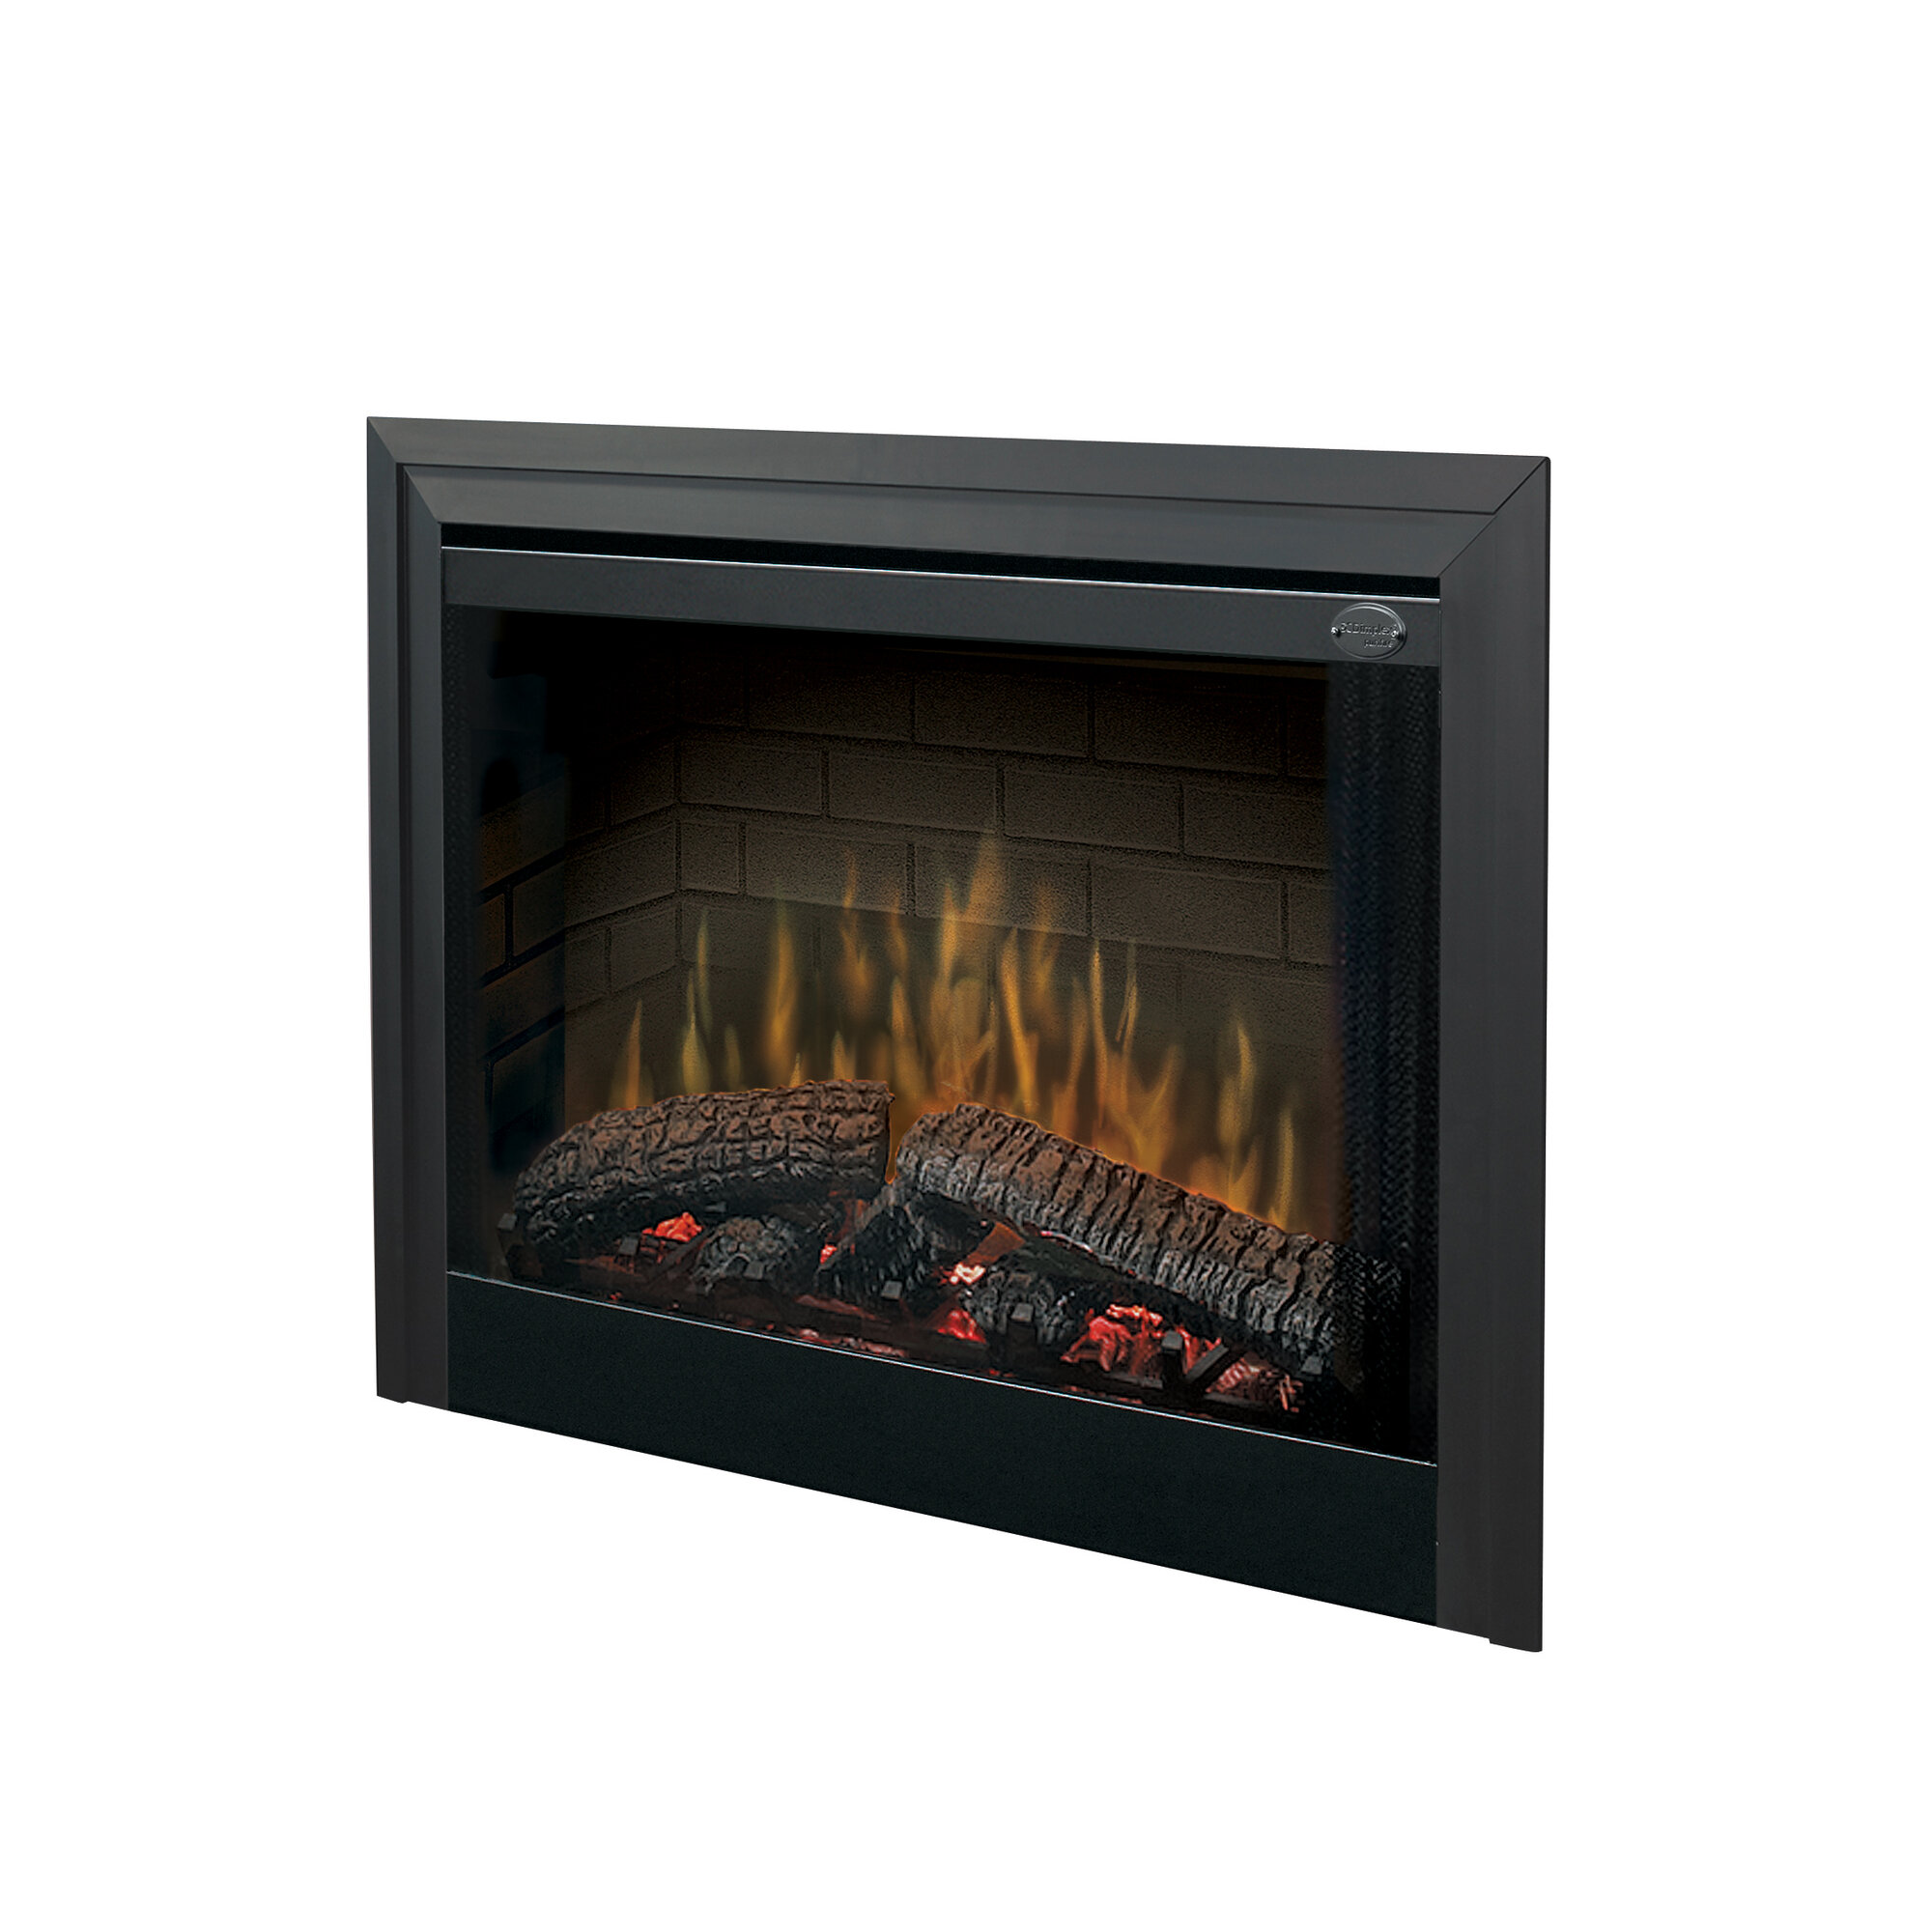 39" Built-in Electric Firebox